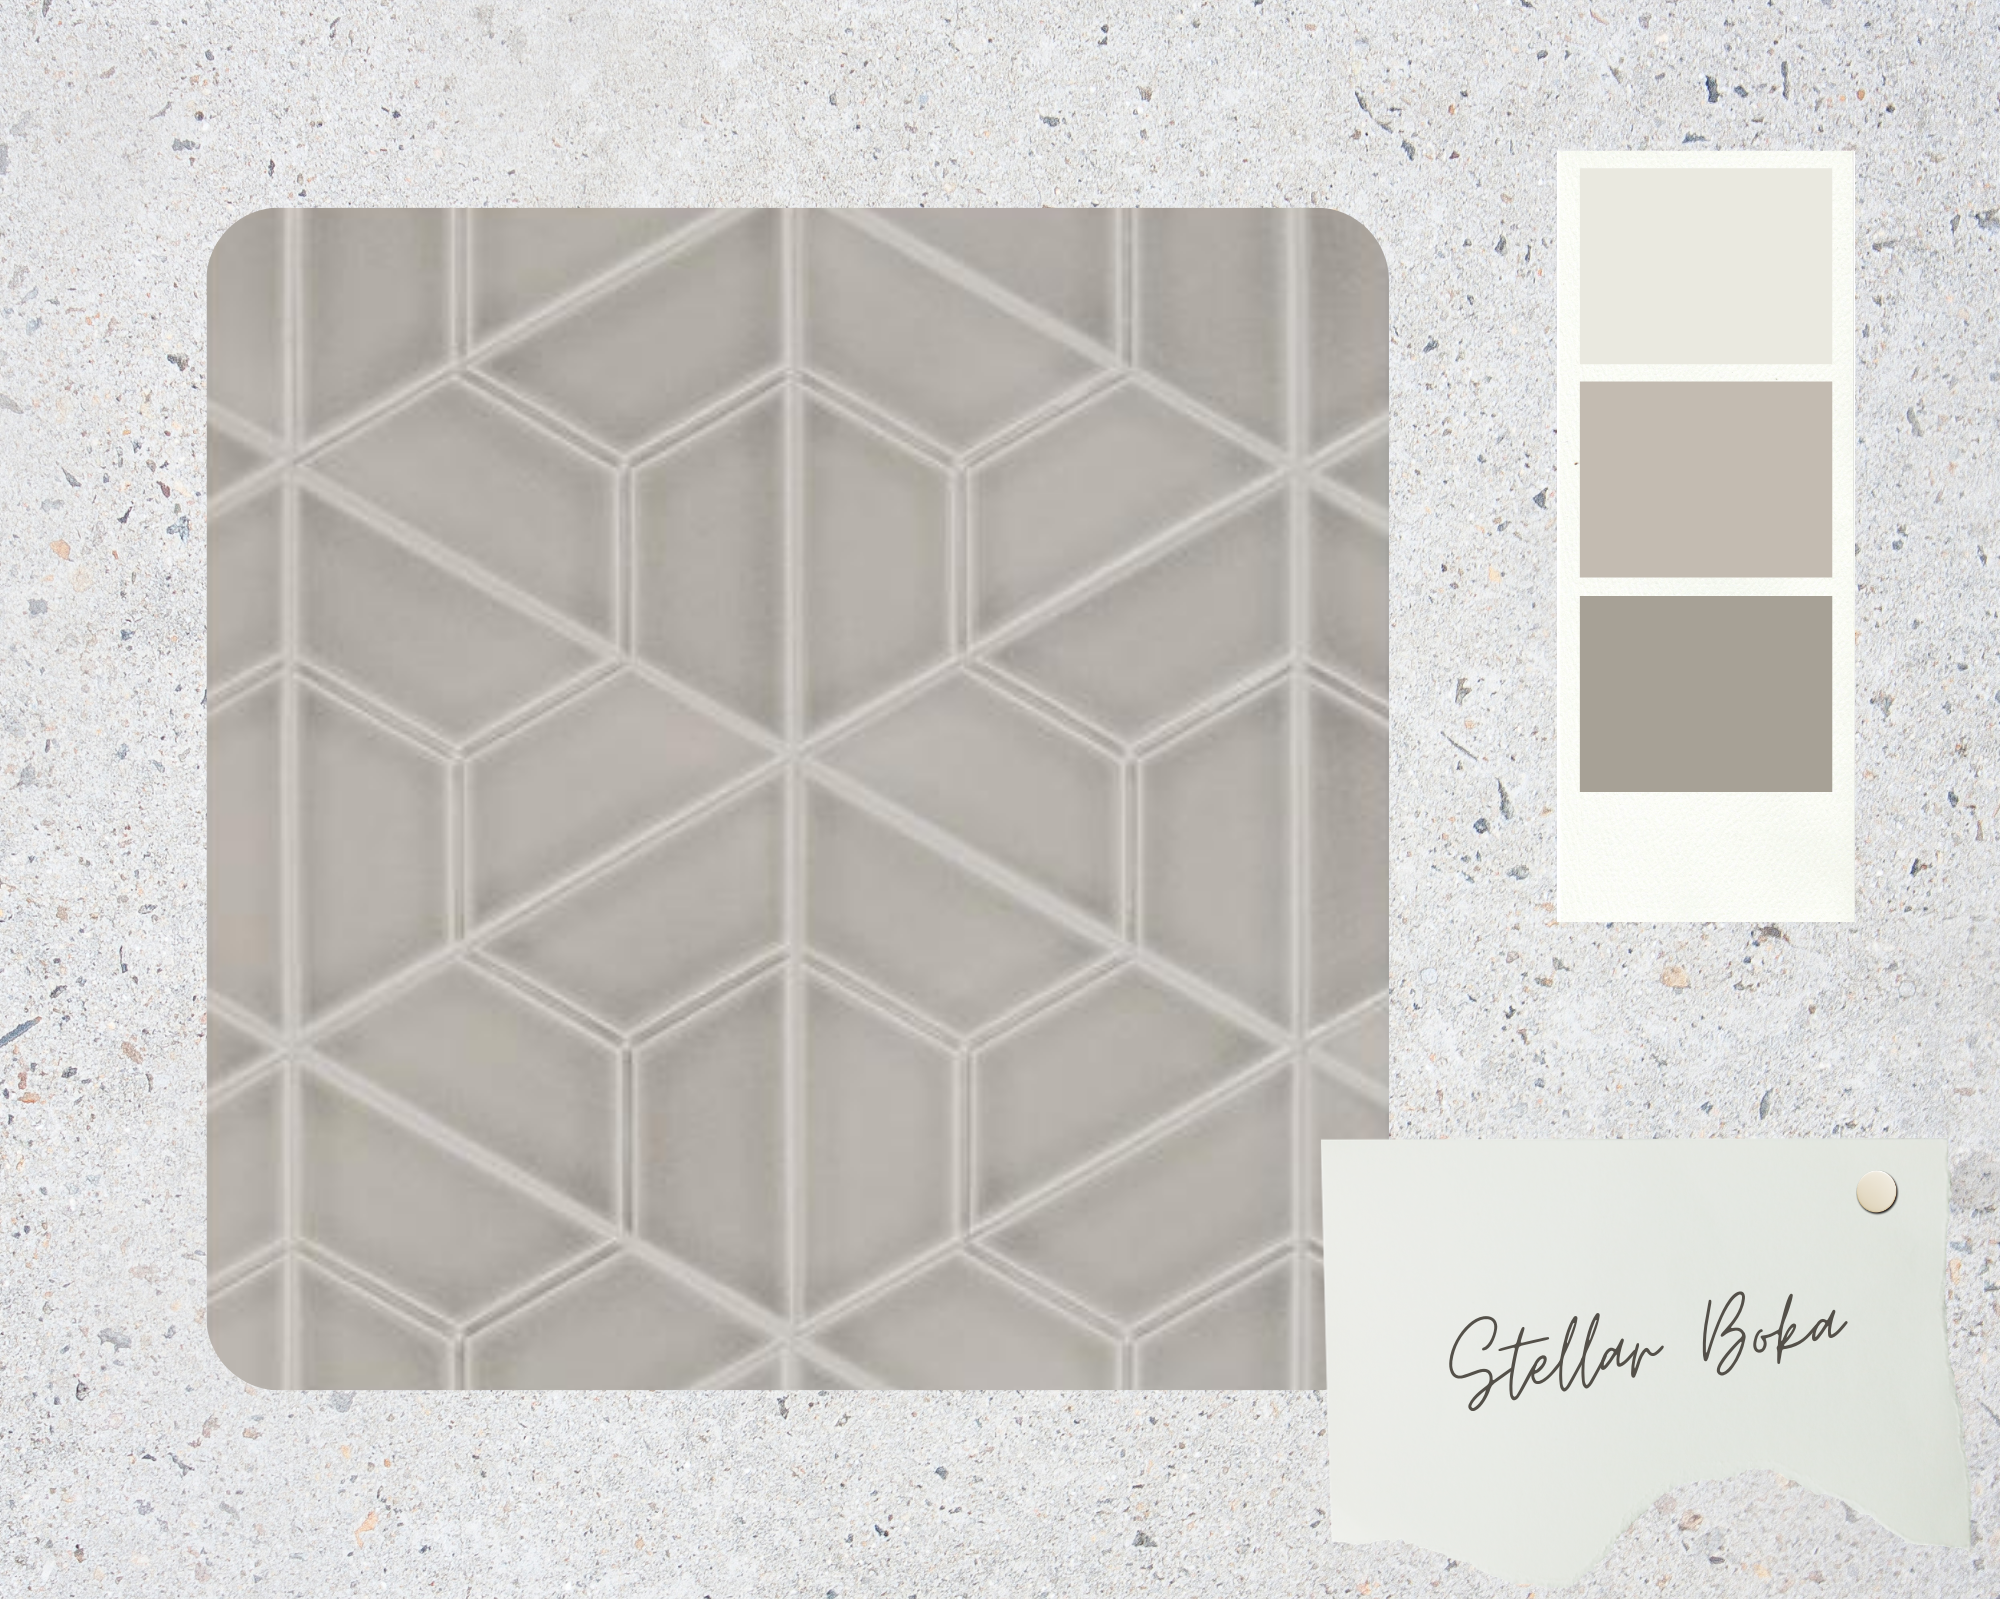 Elevated Honeycomb Tile